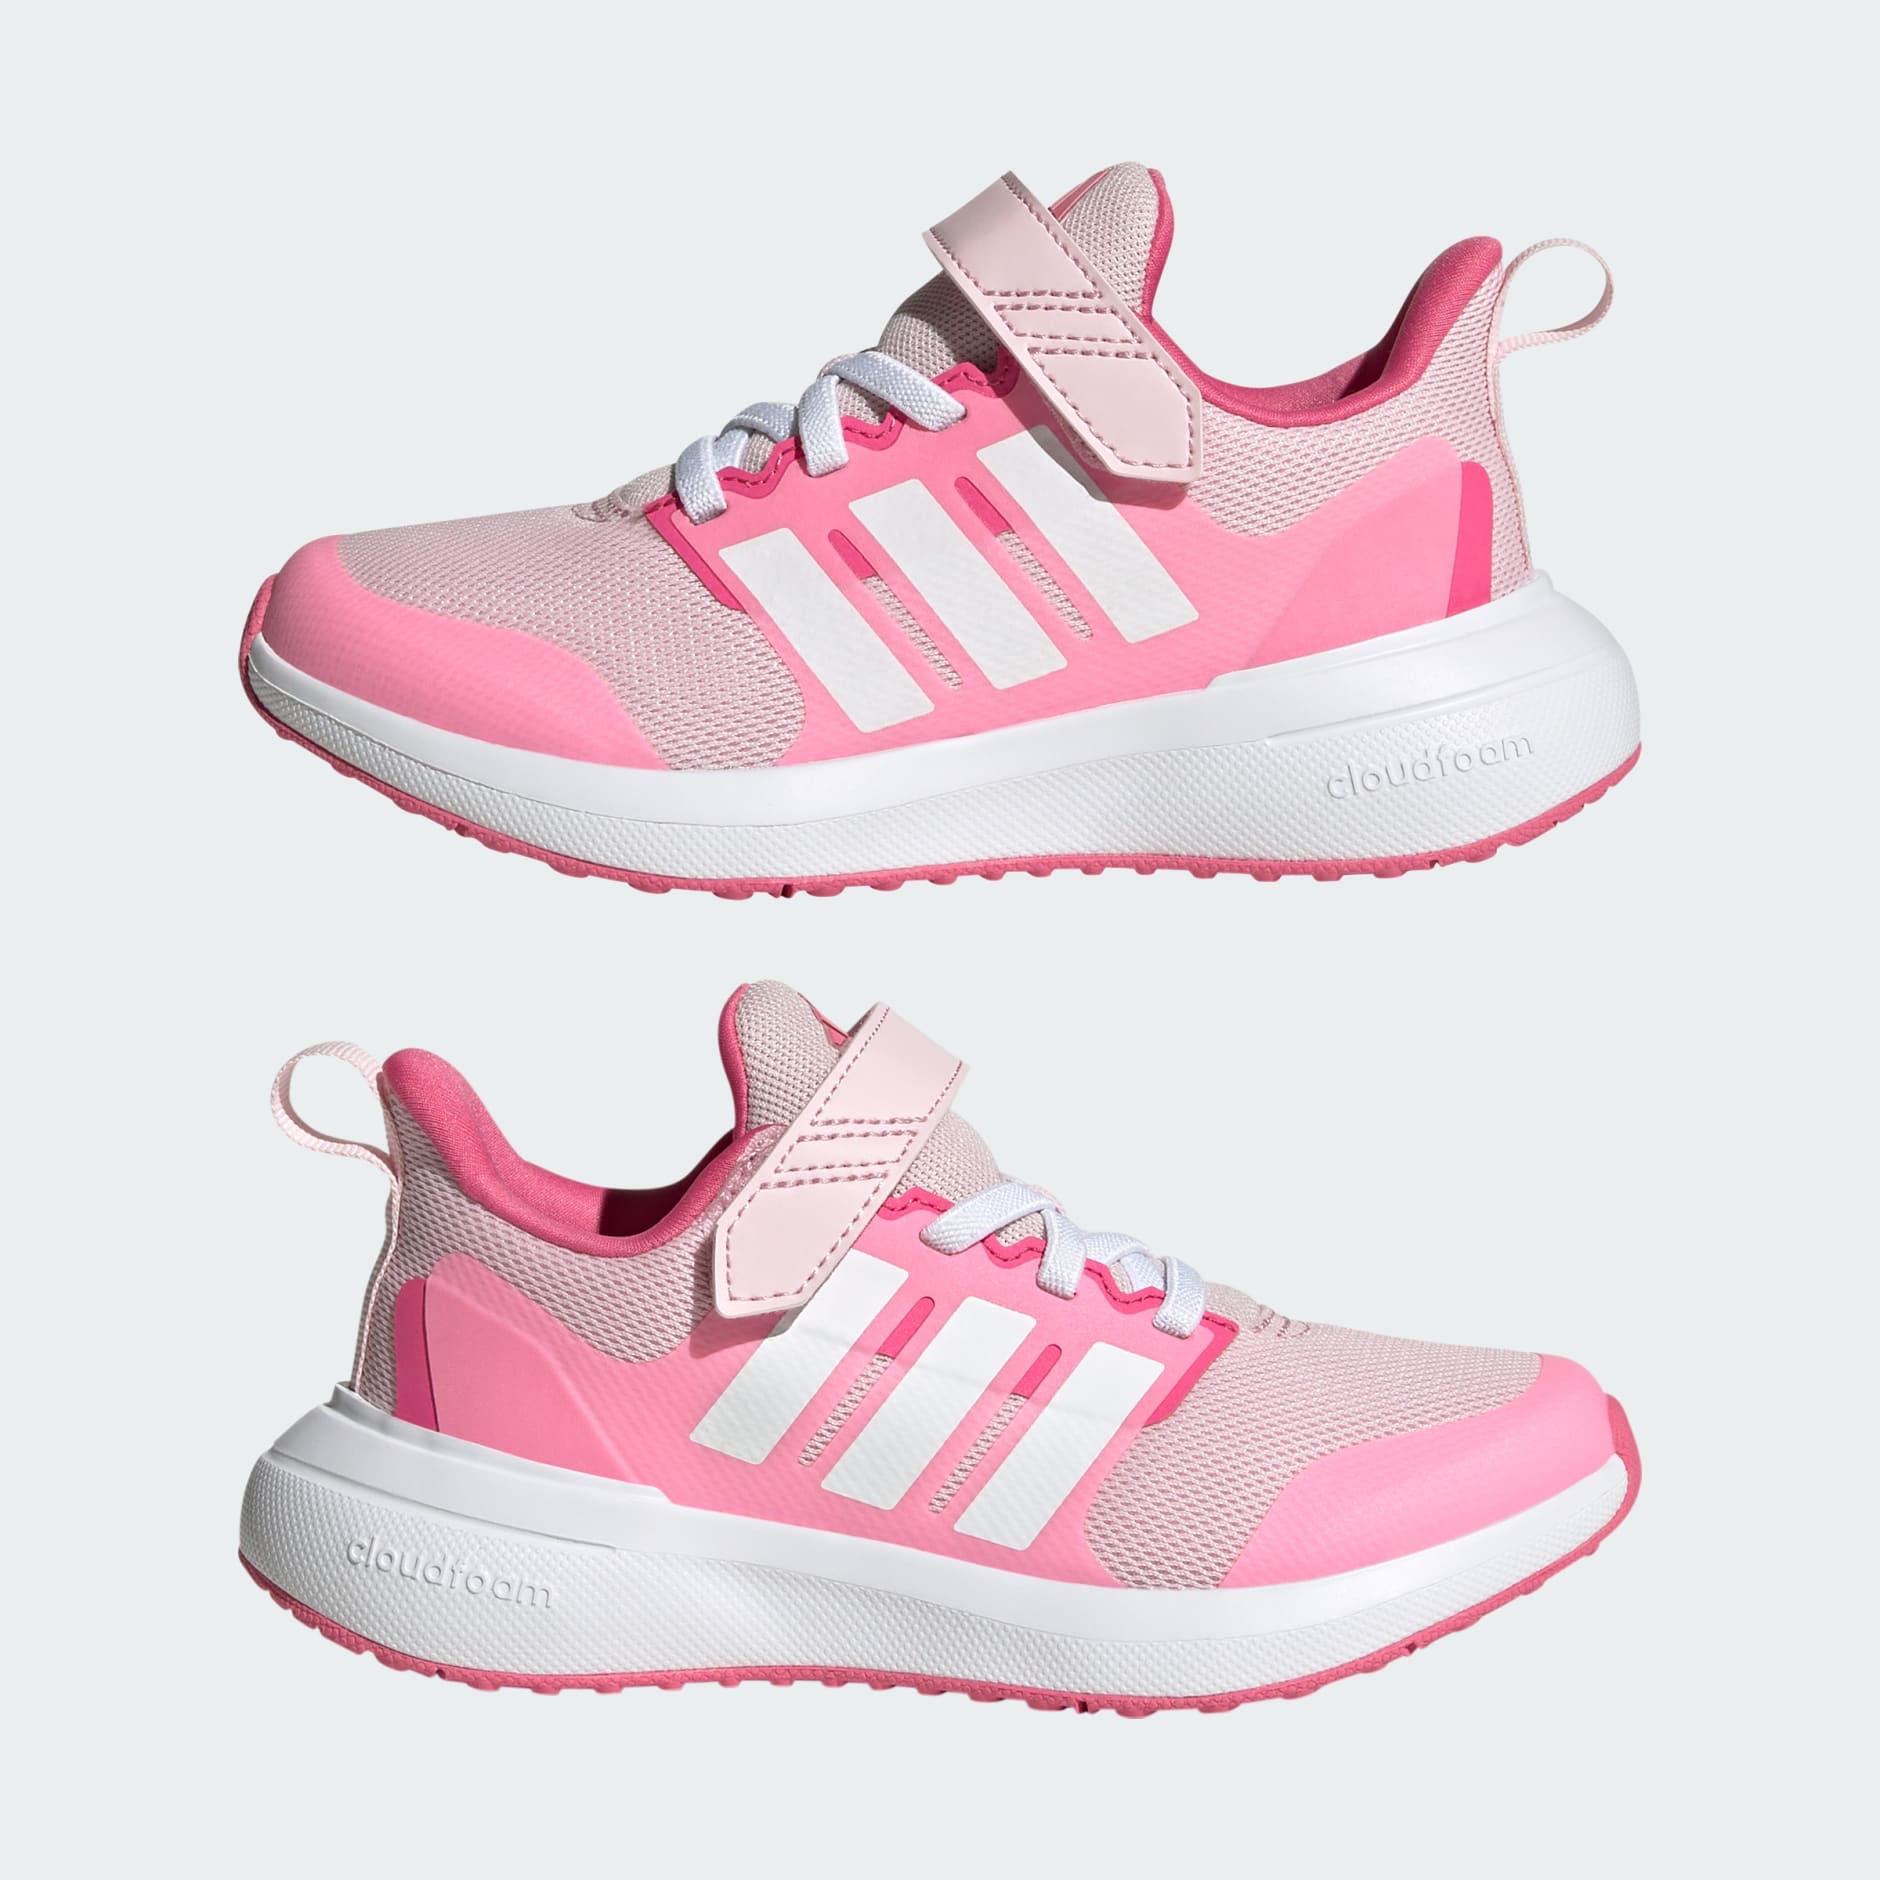 adidas FortaRun 2.0 Cloudfoam Elastic Lace Top Strap Shoes - Pink ...